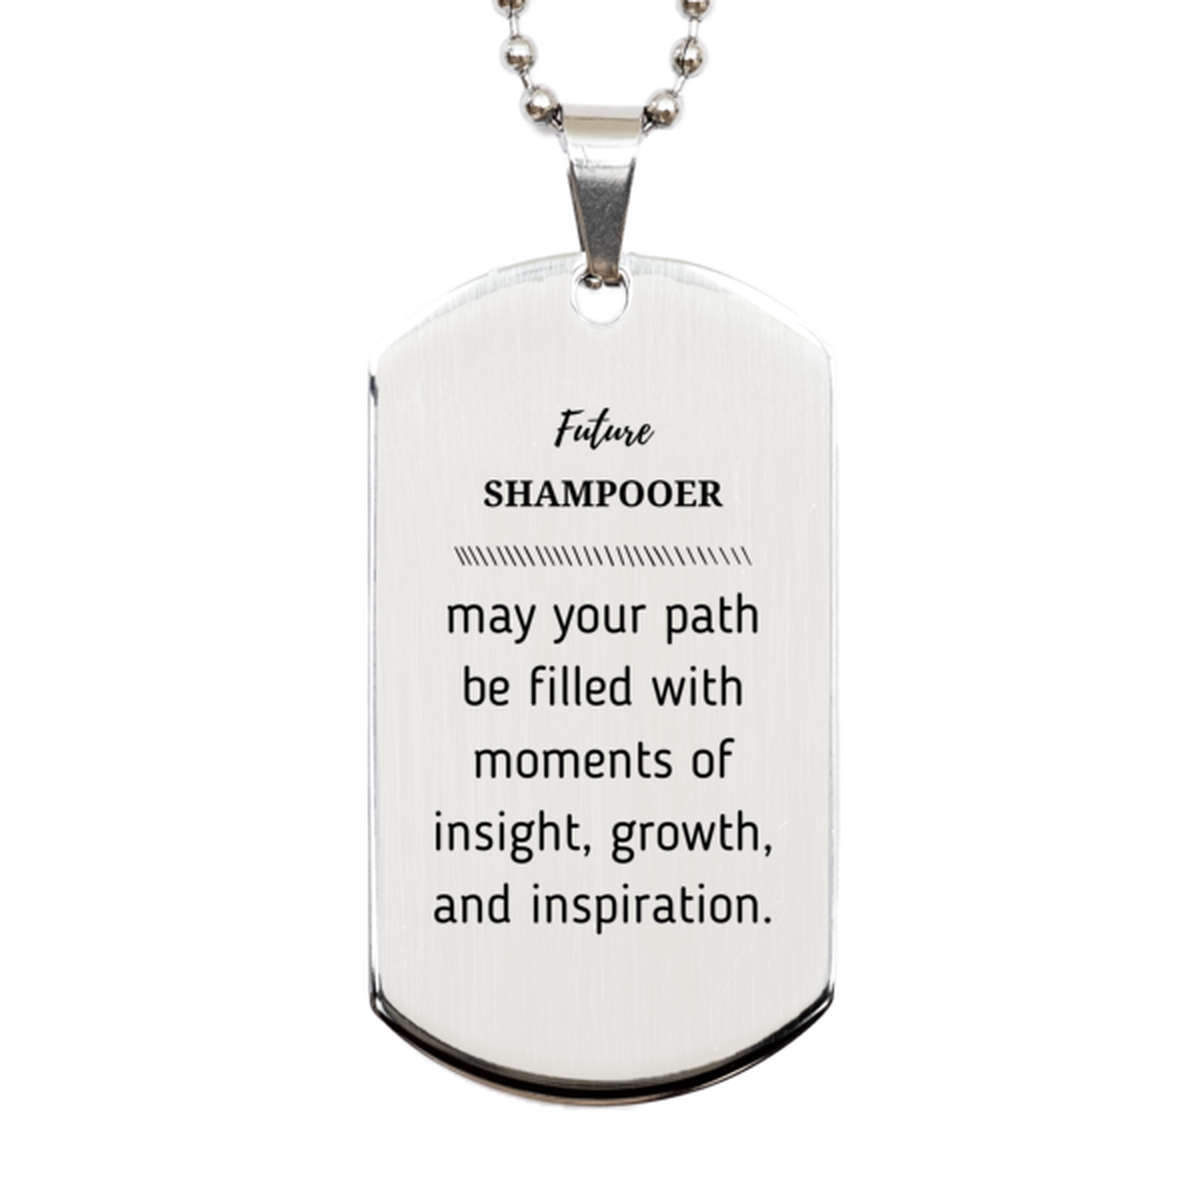 Future Shampooer Gifts, May your path be filled with moments of insight, Graduation Gifts for New Shampooer, Christmas Unique Silver Dog Tag For Men, Women, Friends